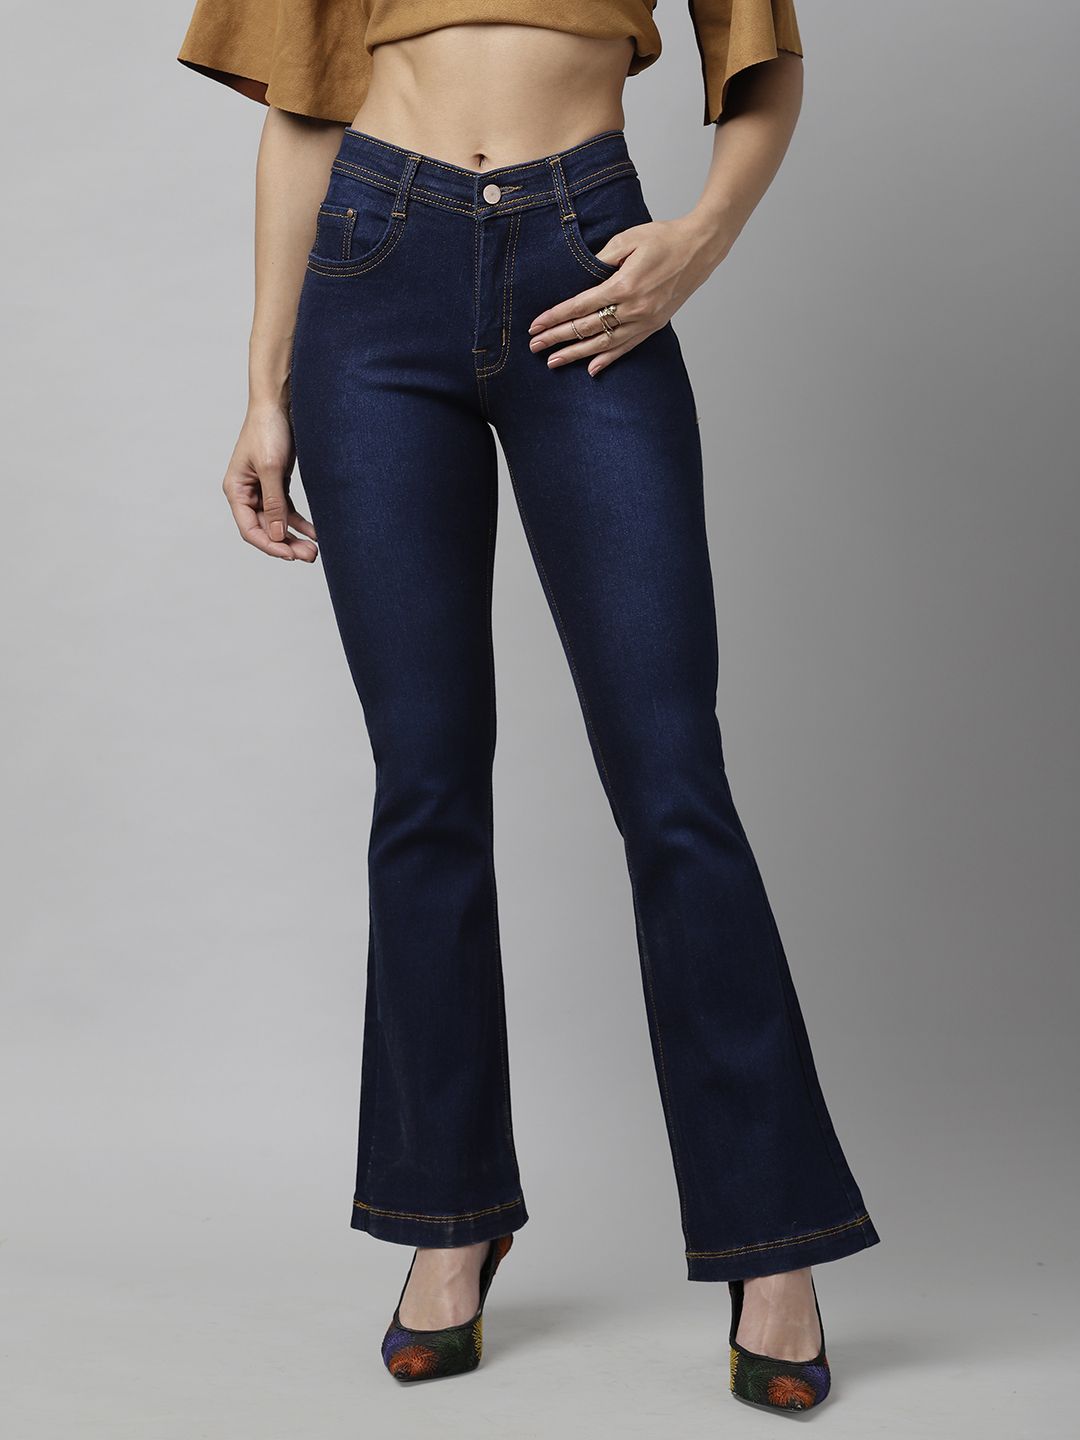 KASSUALLY Women Navy Blue Wide Leg Mid-Rise Clean Look Jeans Price in India